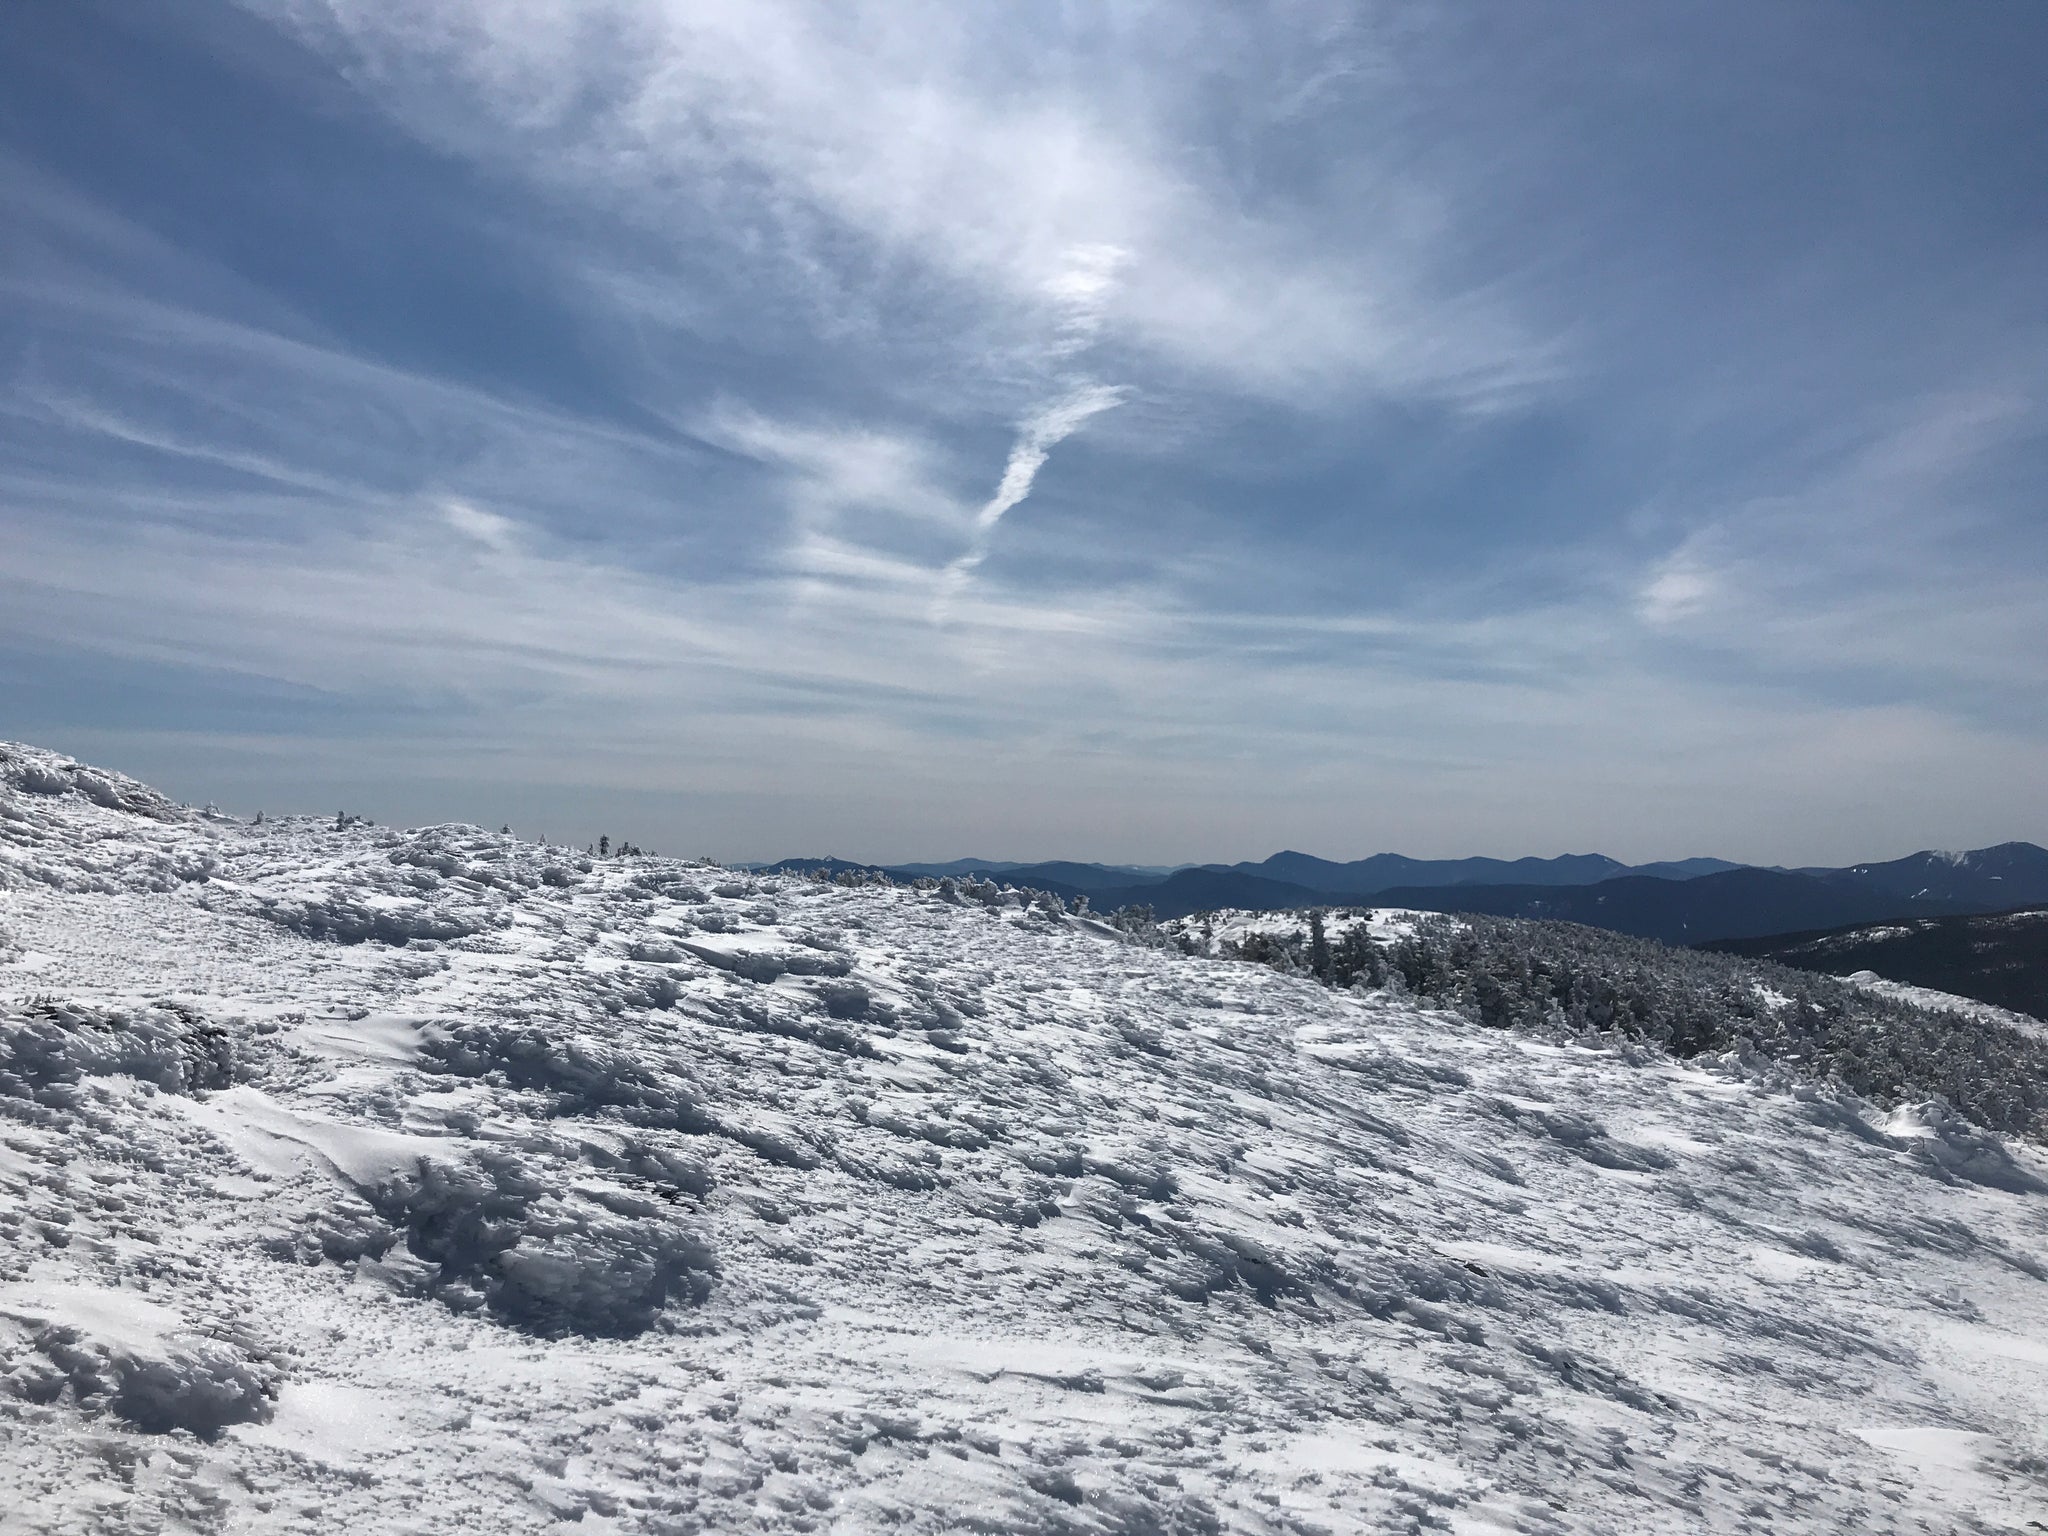 Snowy, wind-gusted mountain top